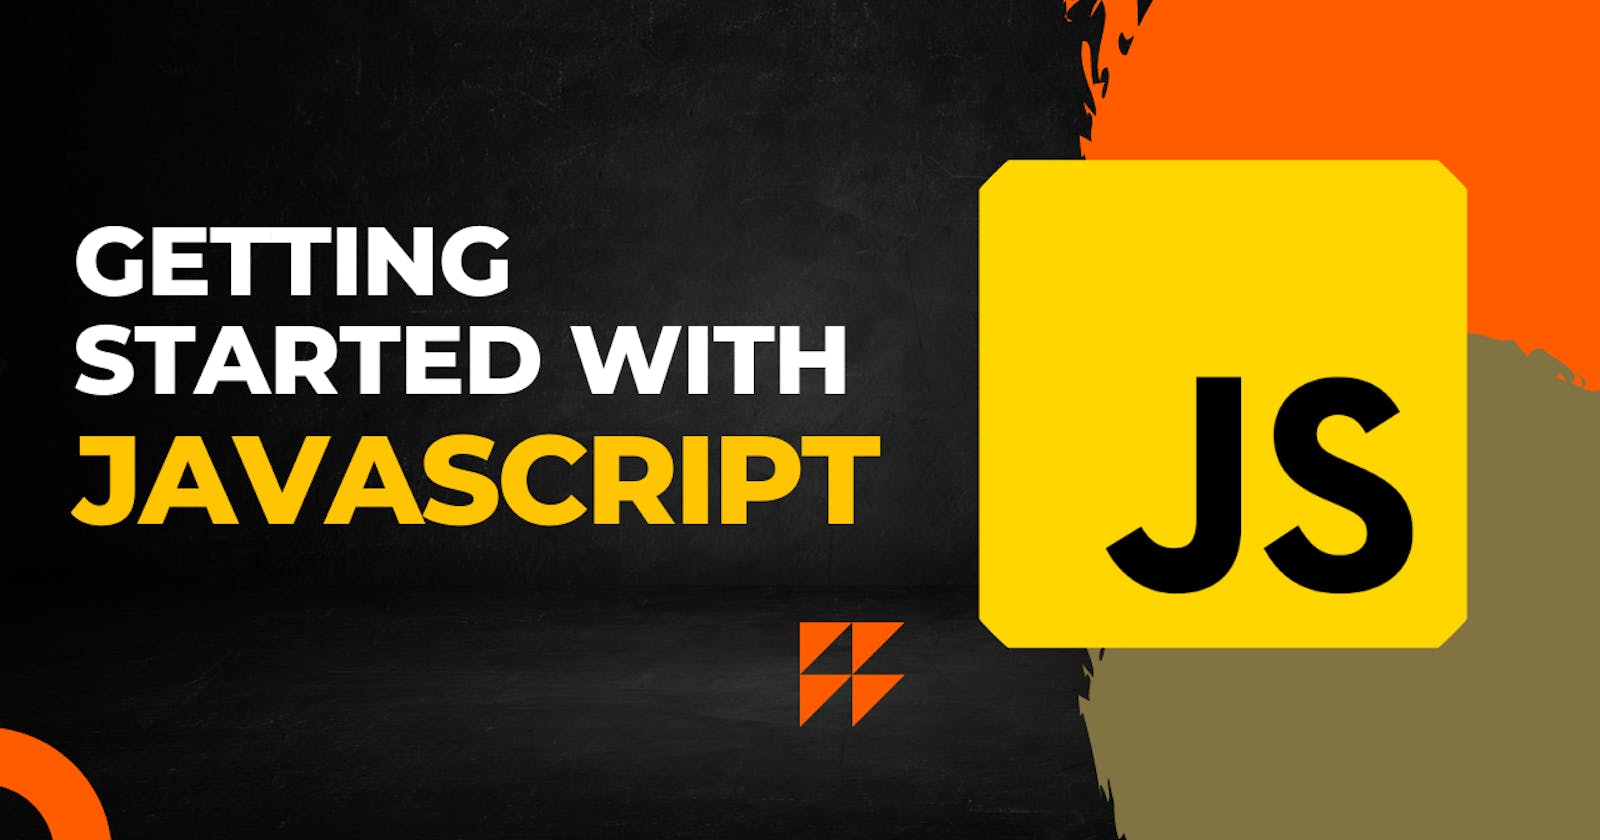 Getting Started With JavaScript.